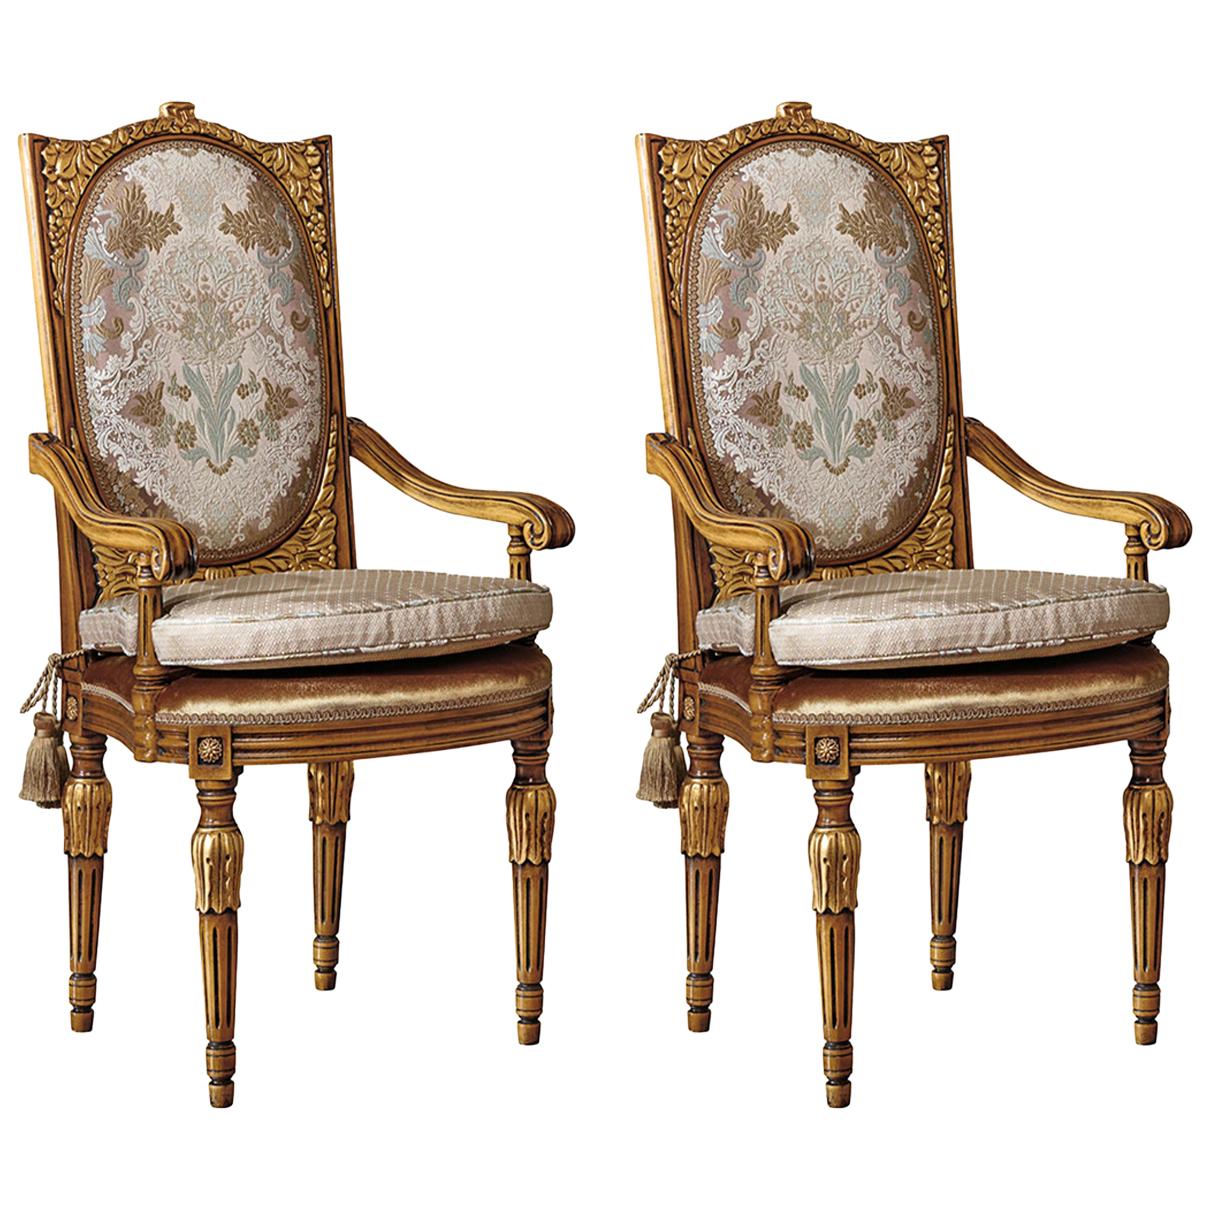 Set of 2 Upholstered Dining Armchairs with Gold Inlays